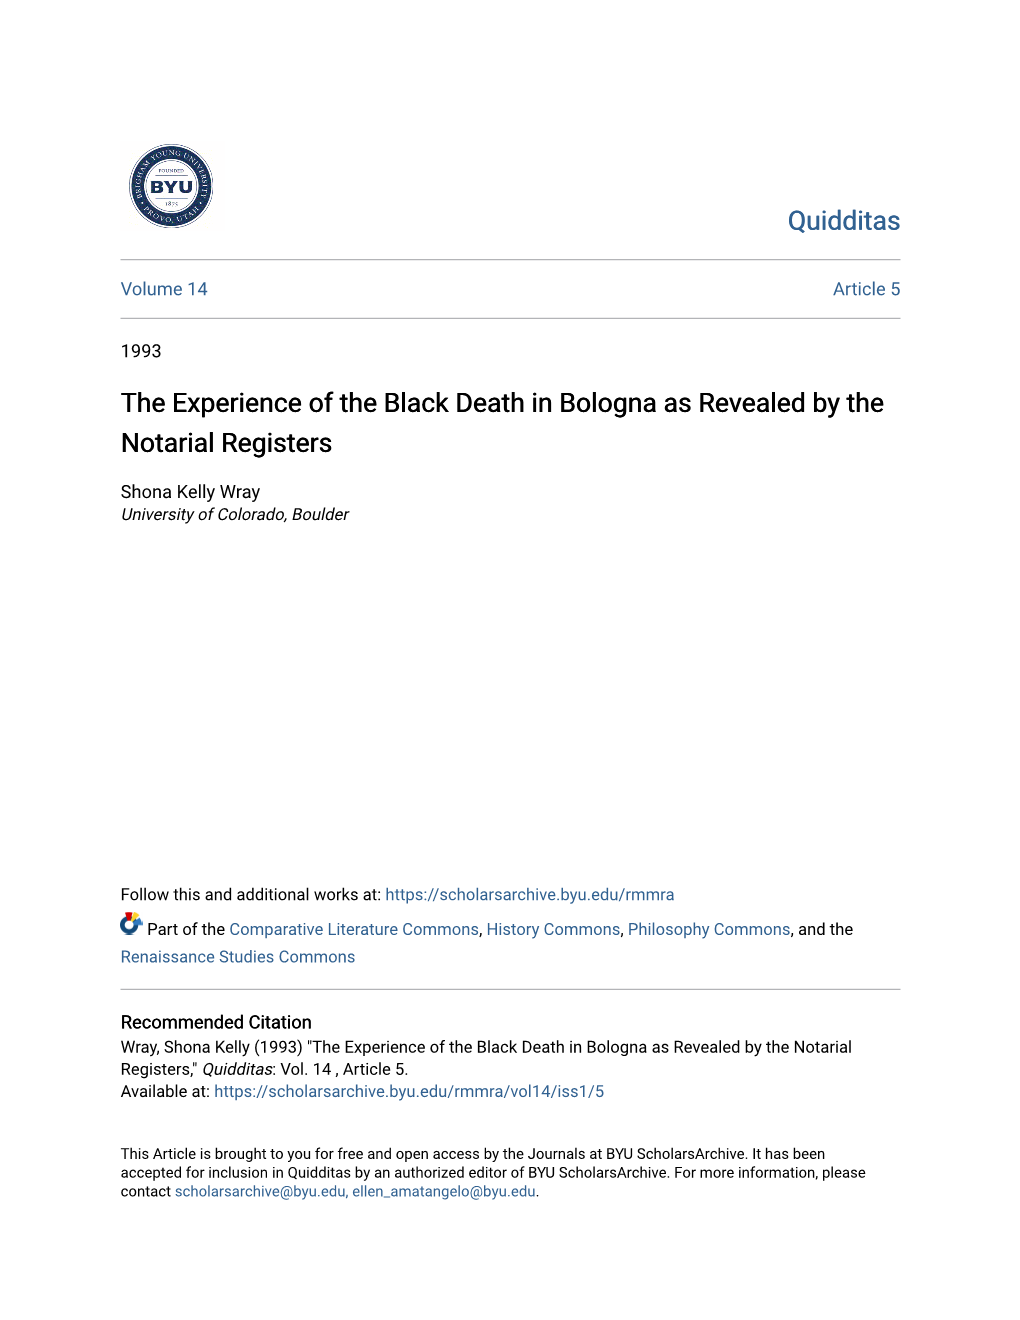 The Experience of the Black Death in Bologna As Revealed by the Notarial Registers